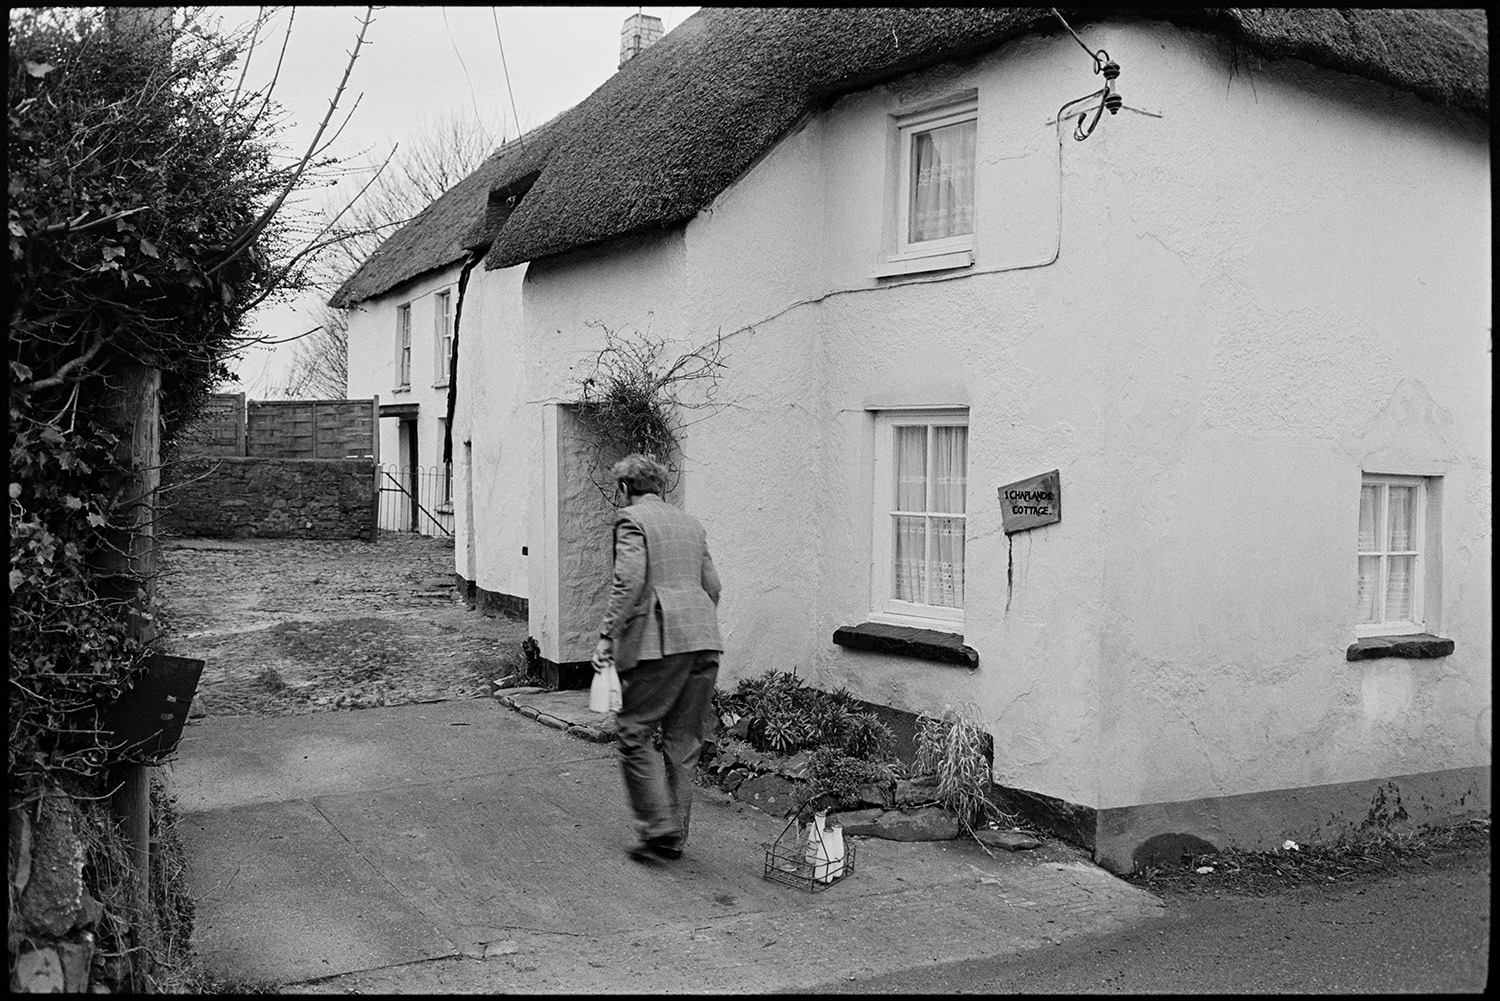 Farmer, milkman doing last milk round, showing new man the ropes, milk bottles.
[Ivor Bourne of Jeffrys farm delivering milk on his last milk round to Chaplands Cottage, Beaford. The cottage has a thatched roof.]